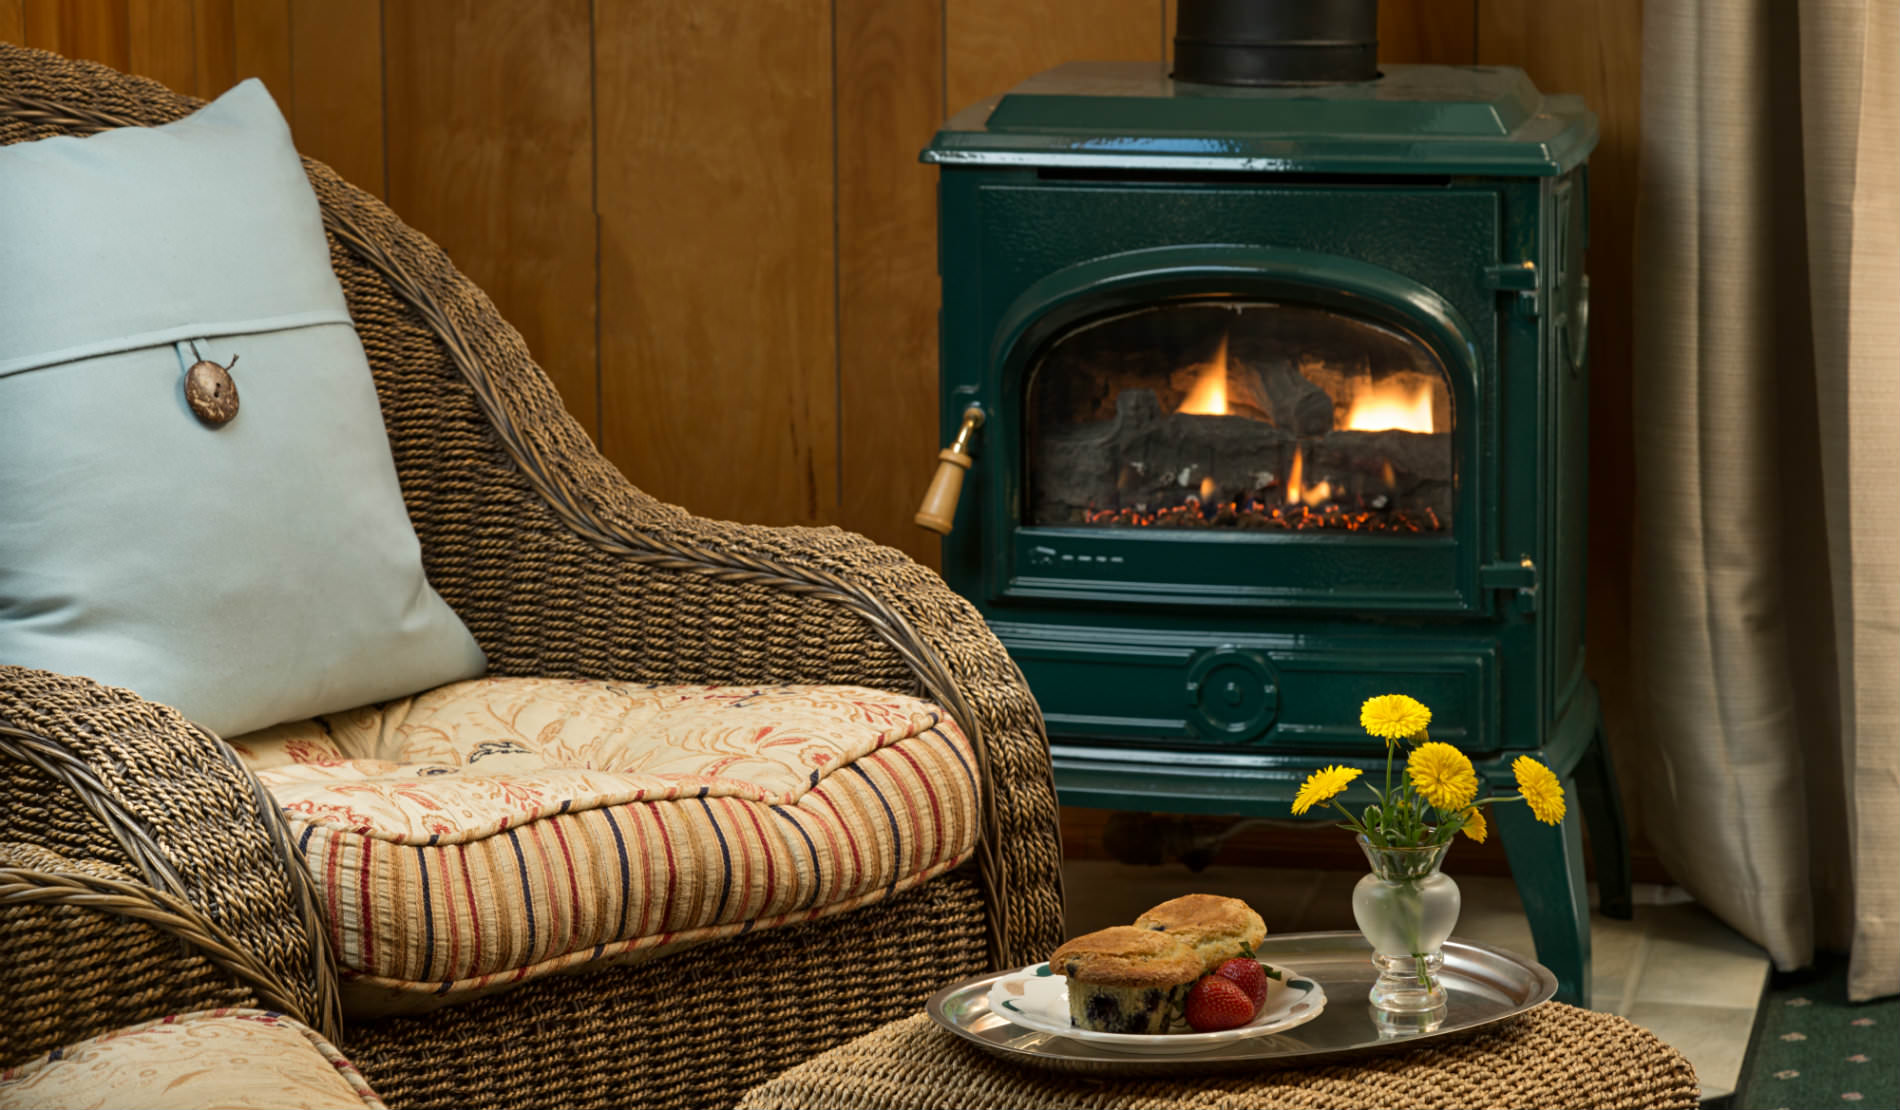 Brown wicker chair with patterend cushion in front of wood burning stove.